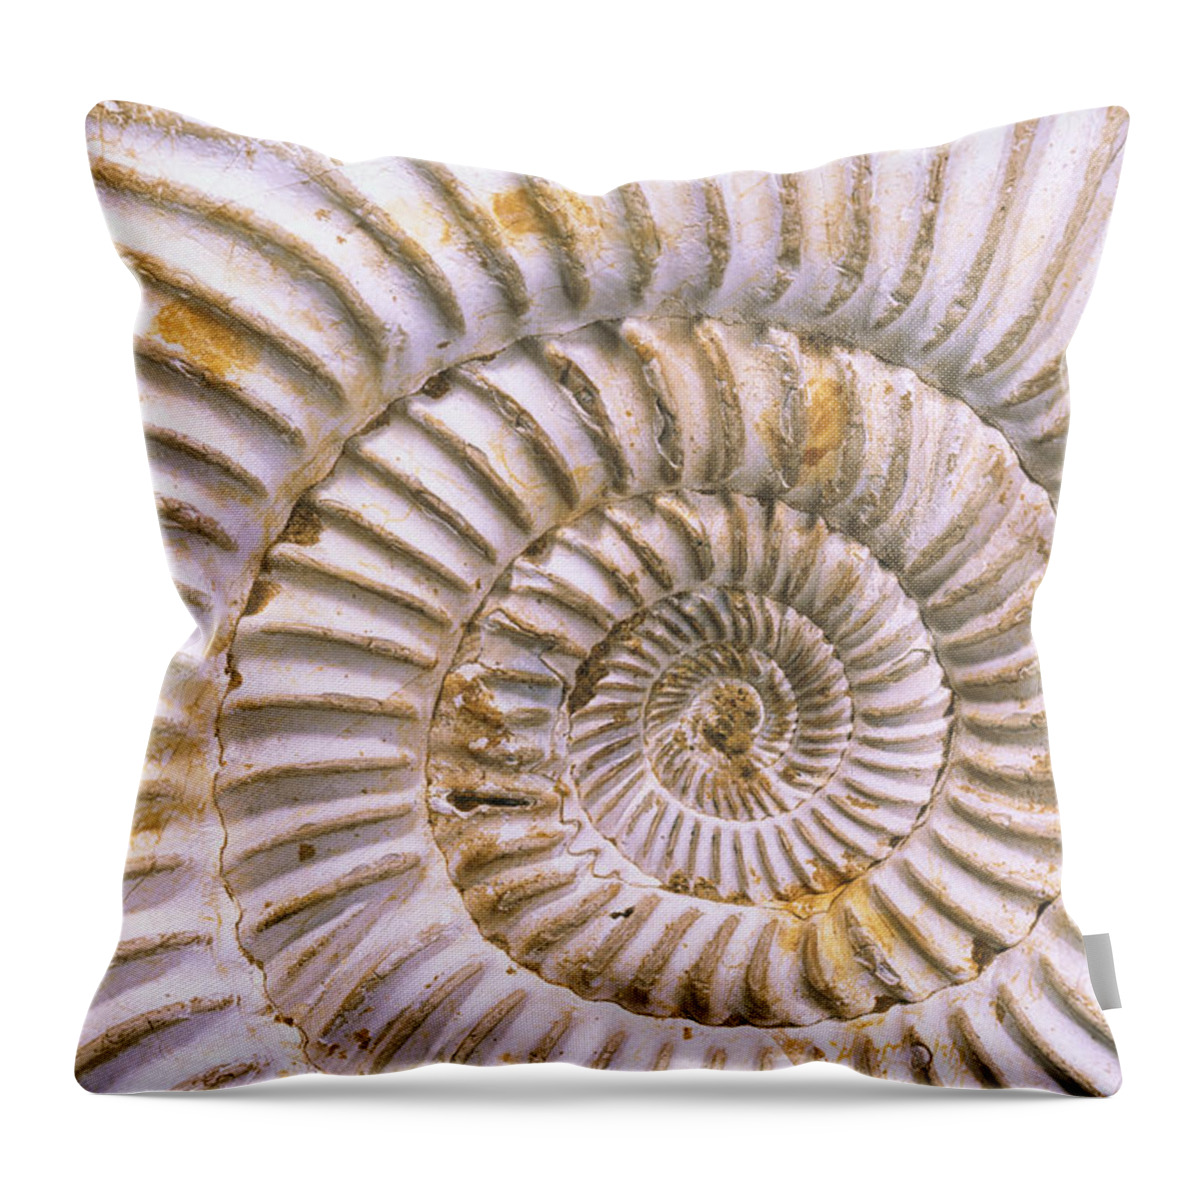 Mp Throw Pillow featuring the photograph Fossil Of Ammonite, Madagascar by Pete Oxford